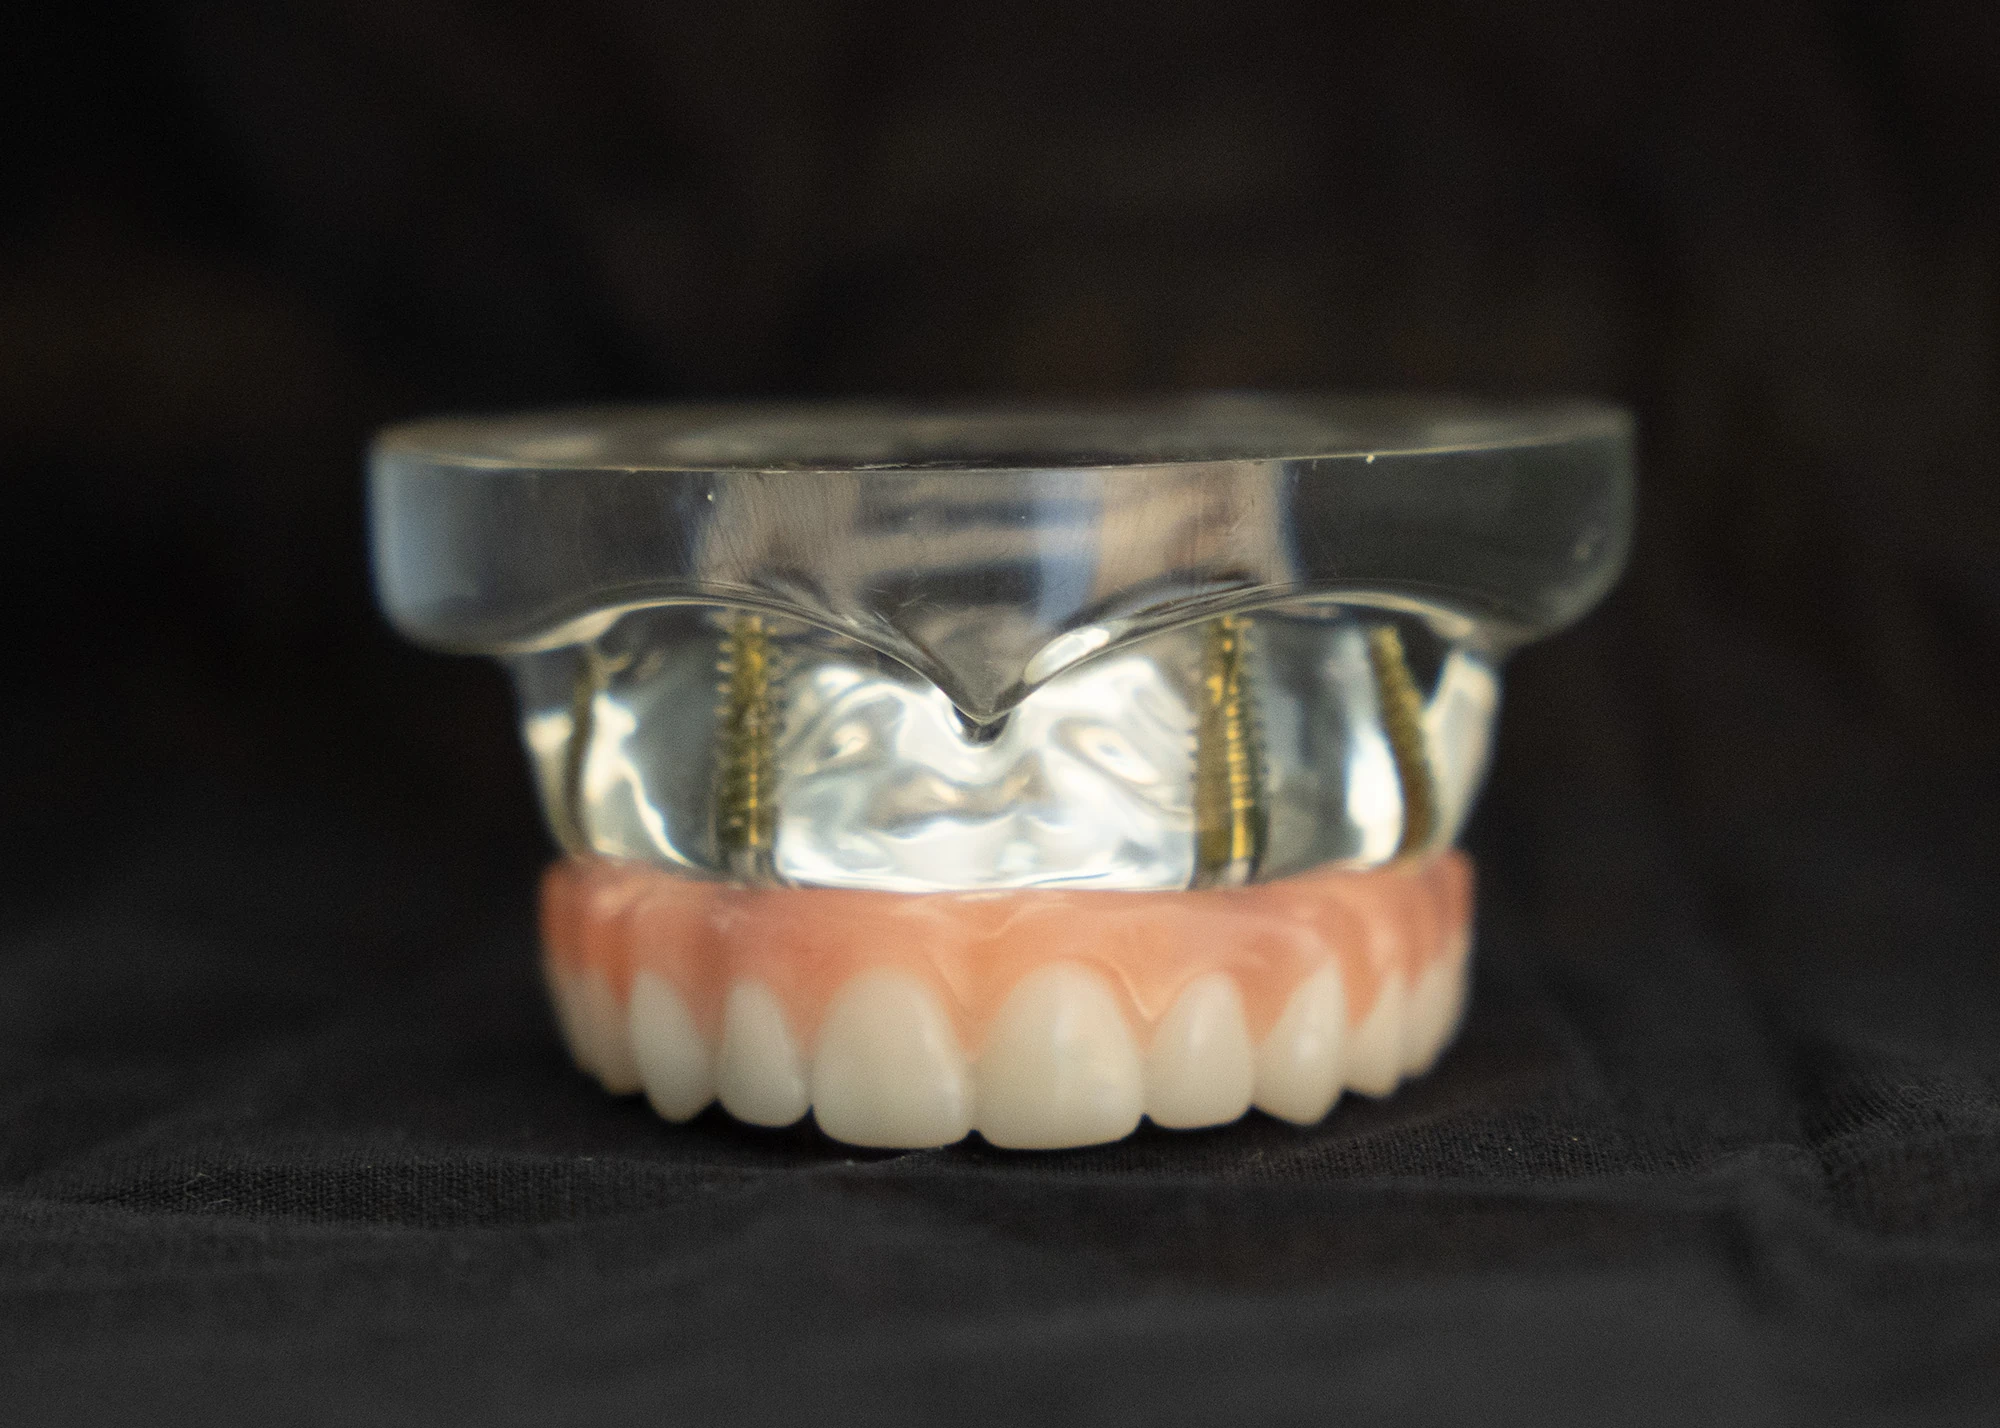 Fixed, full arch prosthesis sample.